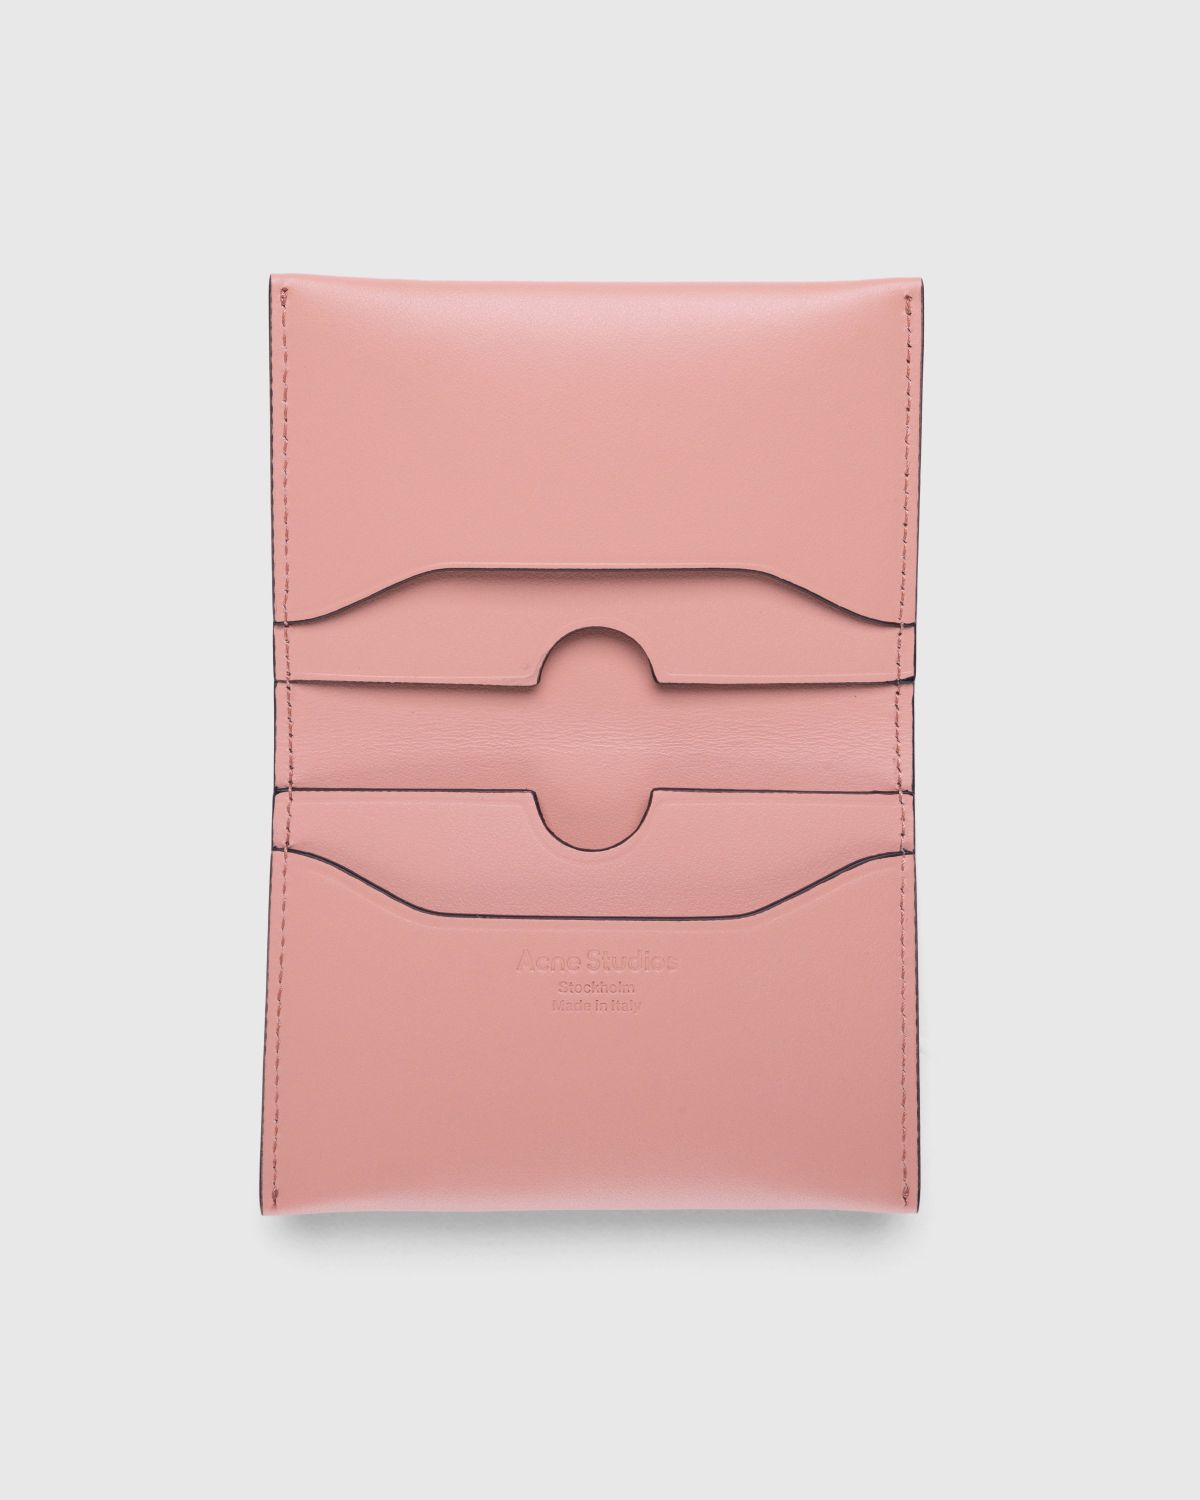 Acne Studios – Folded Leather Card Holder Salmon Pink - Wallets - Pink - Image 2